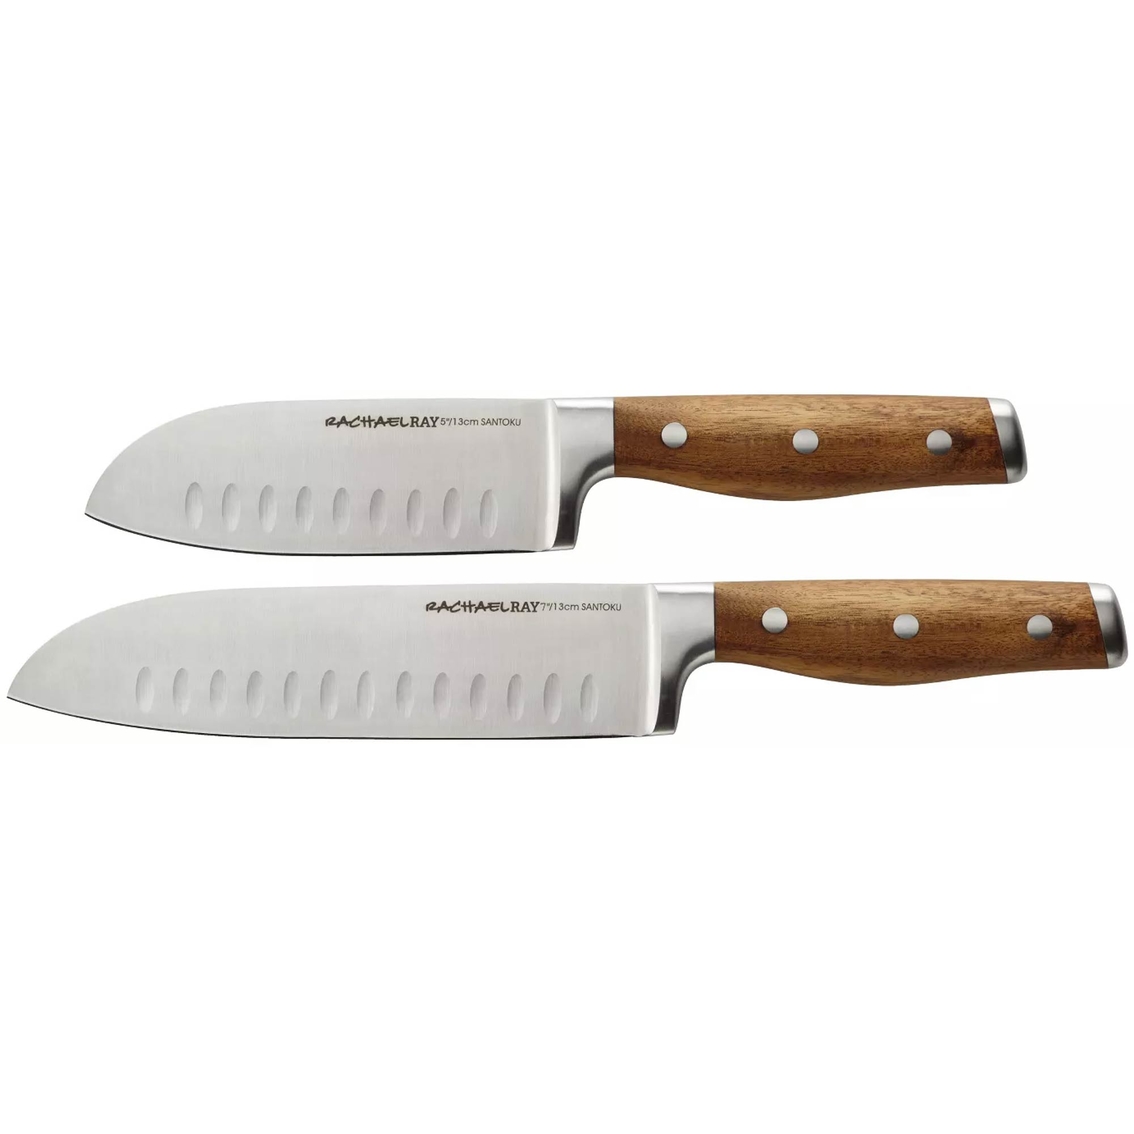 Rachael Ray Santoku Knife 2 pc. Set 5 and 7 in. - Image 2 of 4